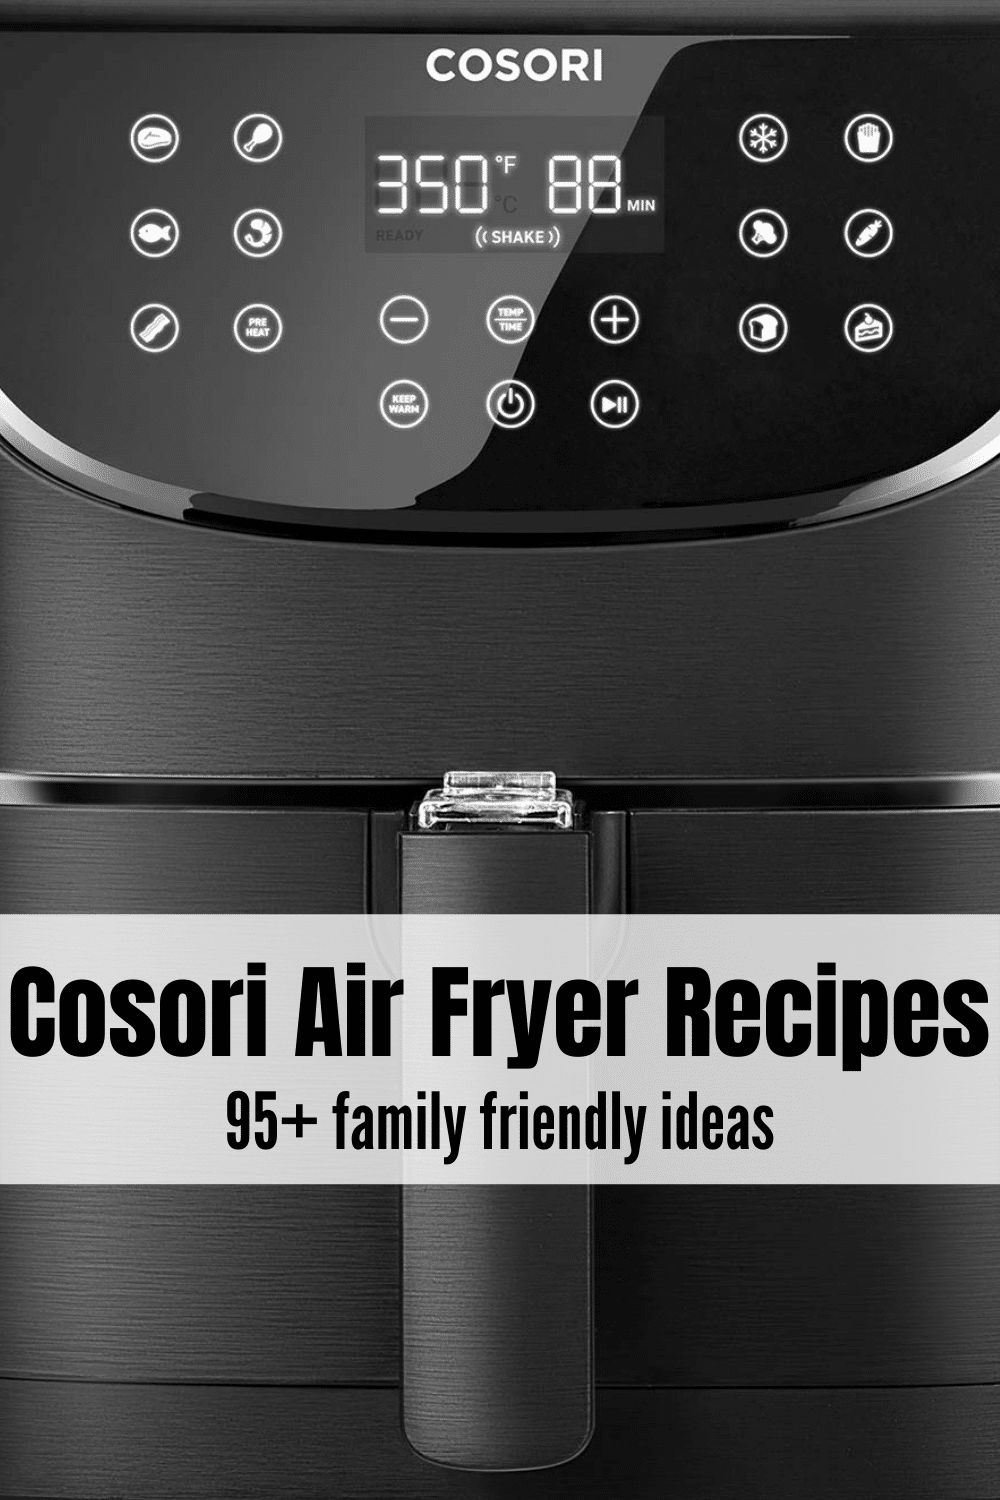 Cosori Air Fryer Recipes are quick and easy recipes that have been made and tested in Cosori Air Fryers. These recipes use common ingredients and taste delicious! #CosoriAirFryerRecipes #Cosori #Airfryerrecipes via @vegetarianmamma